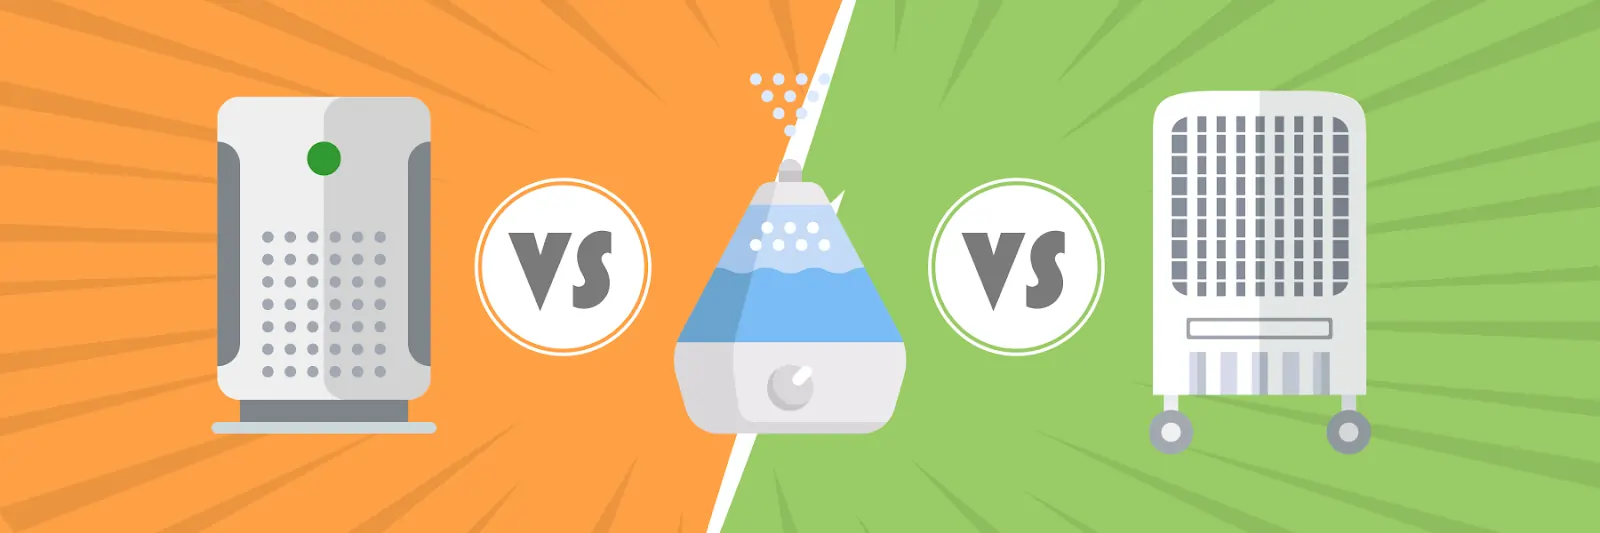 Air Purifiers vs Humidifiers vs Dehumidifiers: Differences